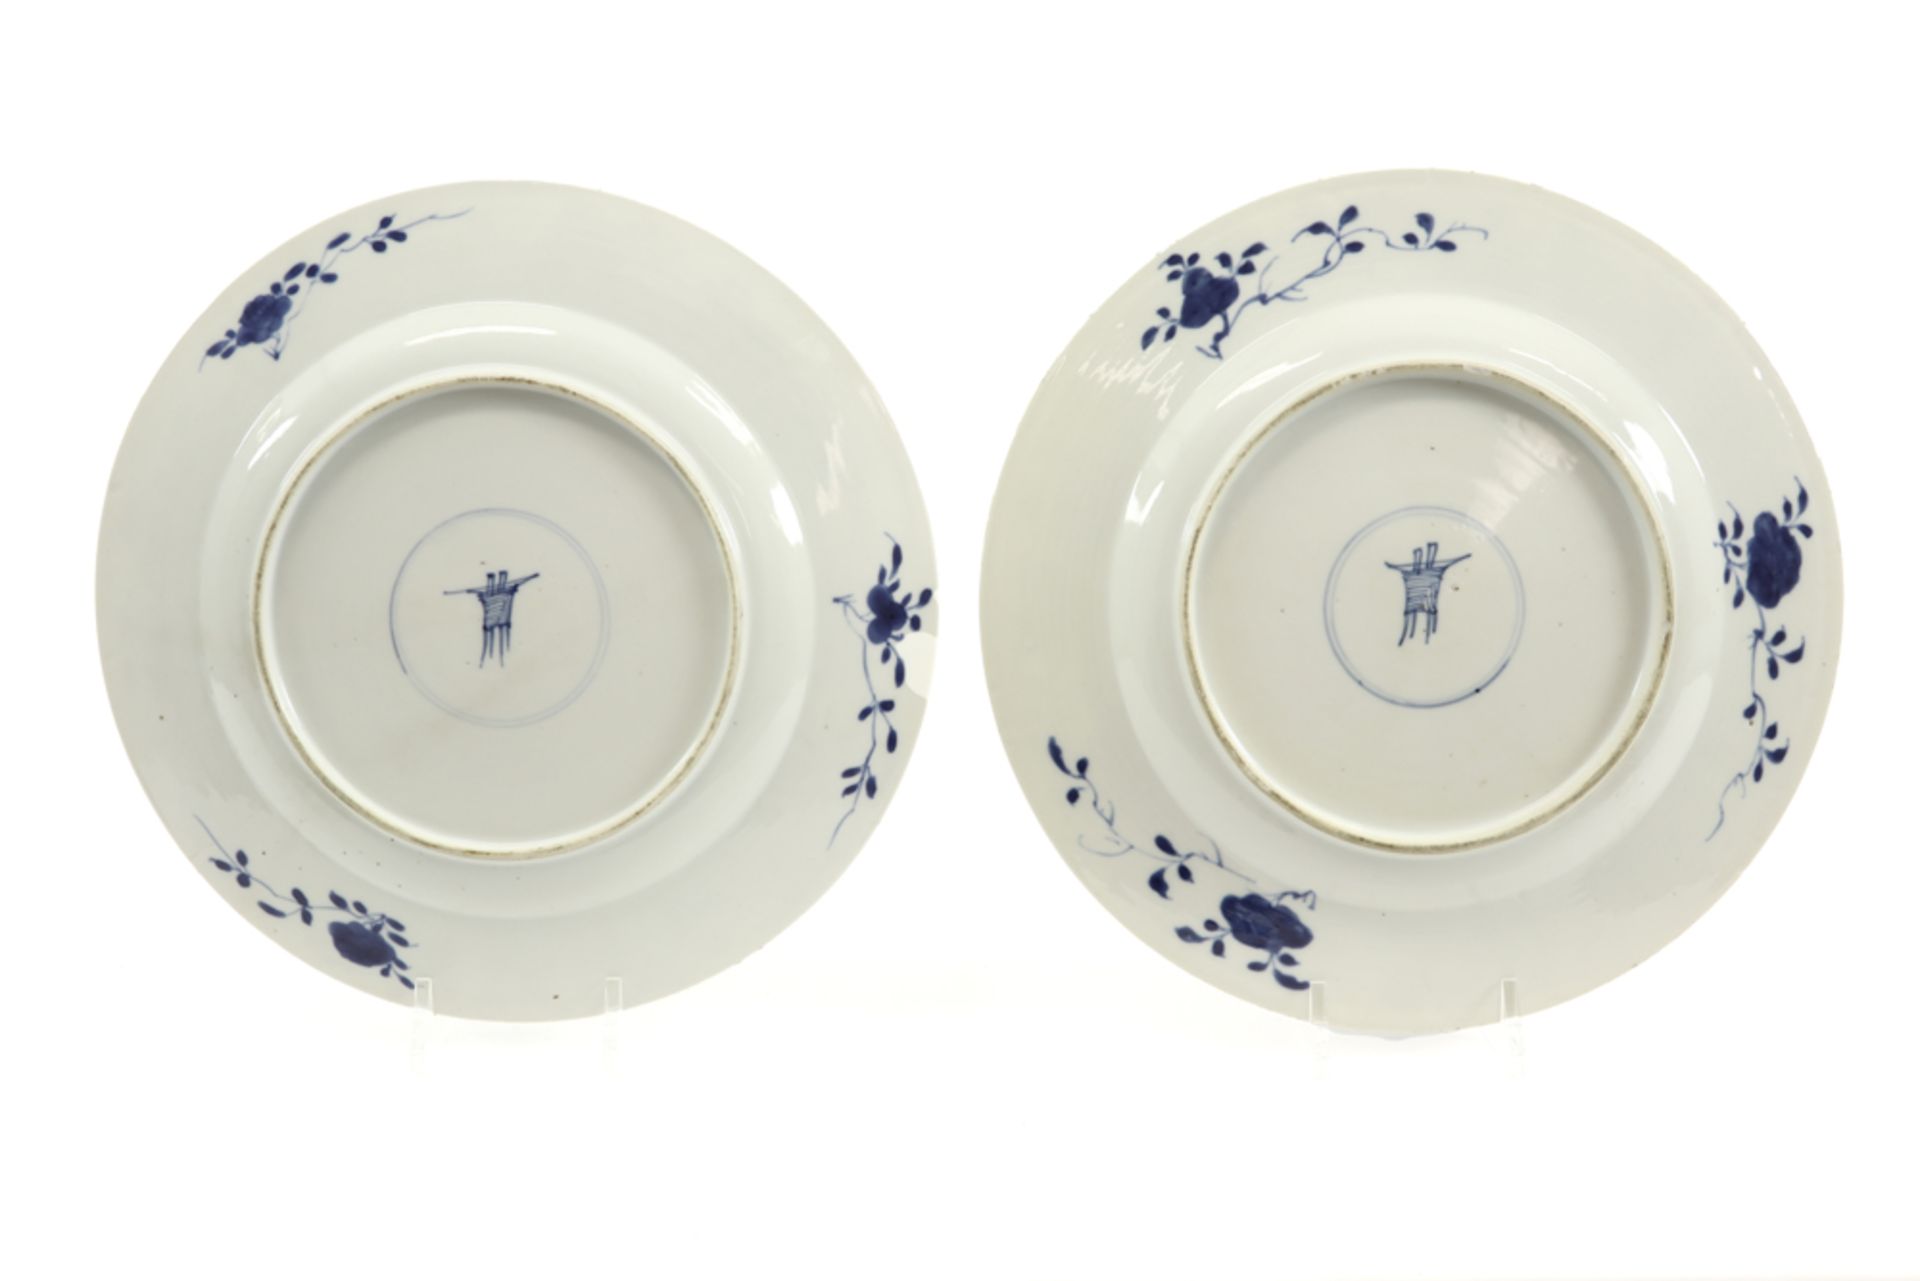 pair of 17th/18th Cent. Chinese Kang Hsi period dishes in marked porcelain with a blue-white decor - Image 2 of 2